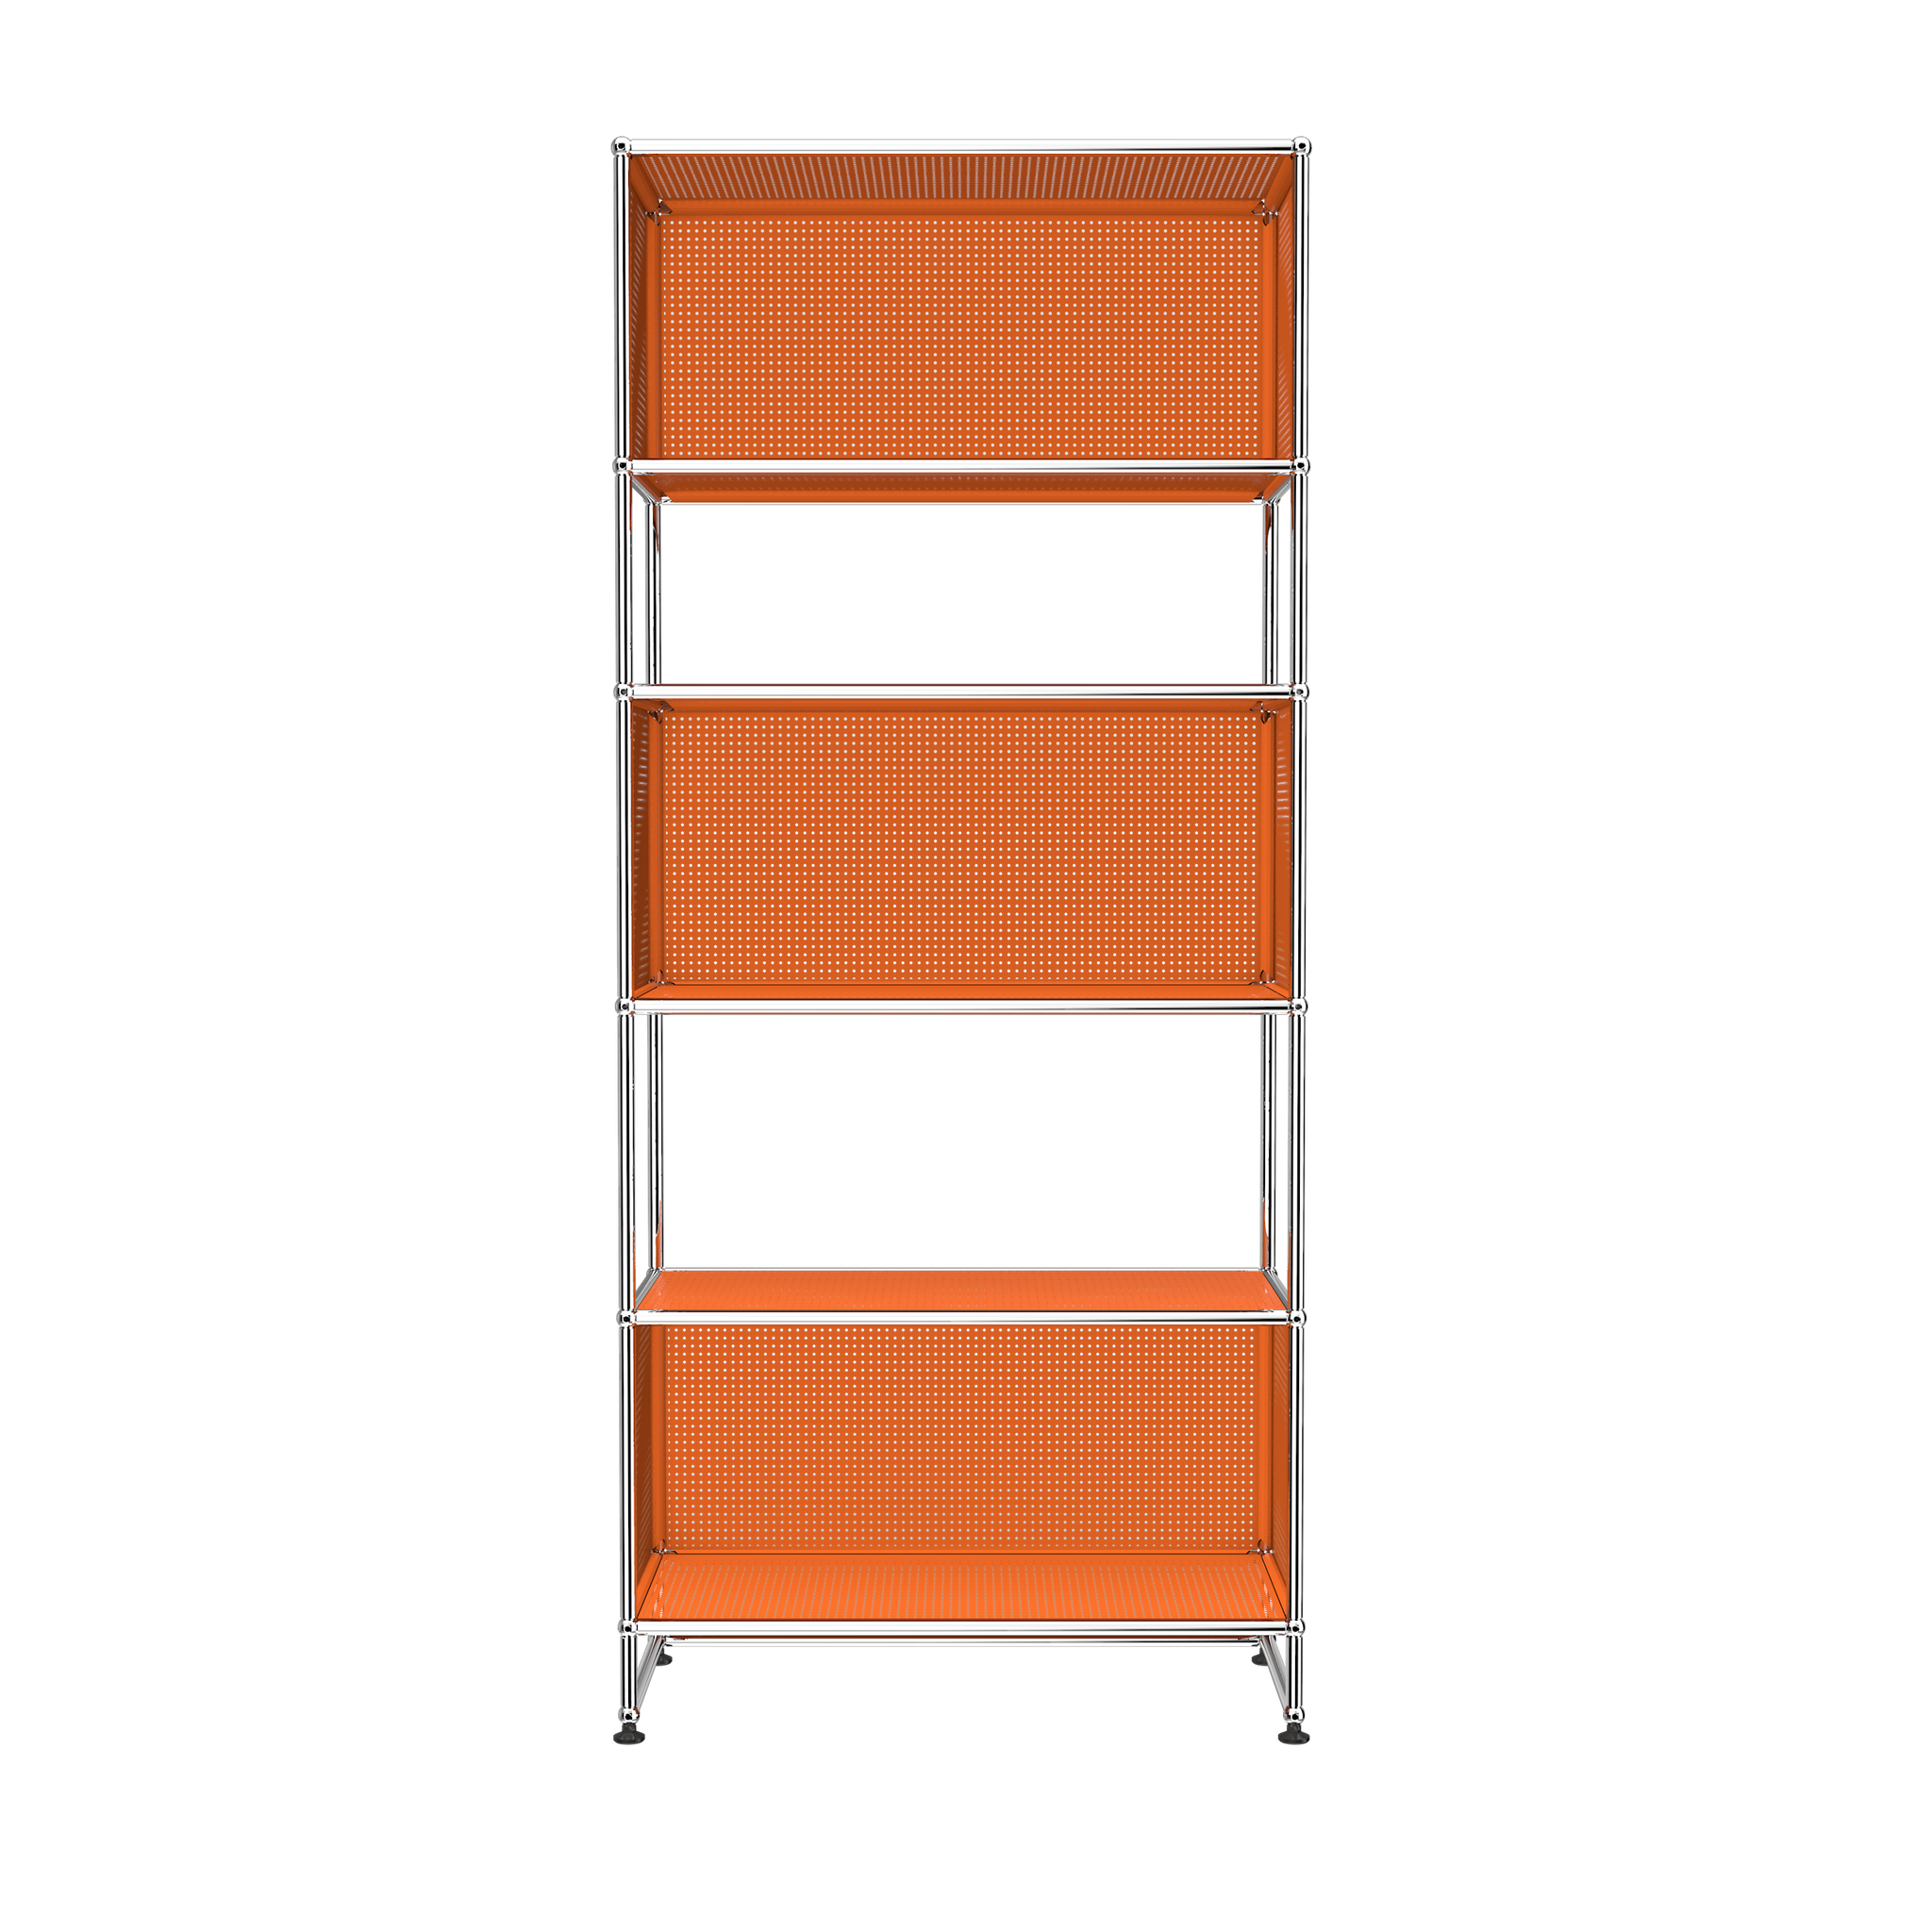 USM Haller 3 Box Shelving with Perforated Panels (RE119) in Pure Orange